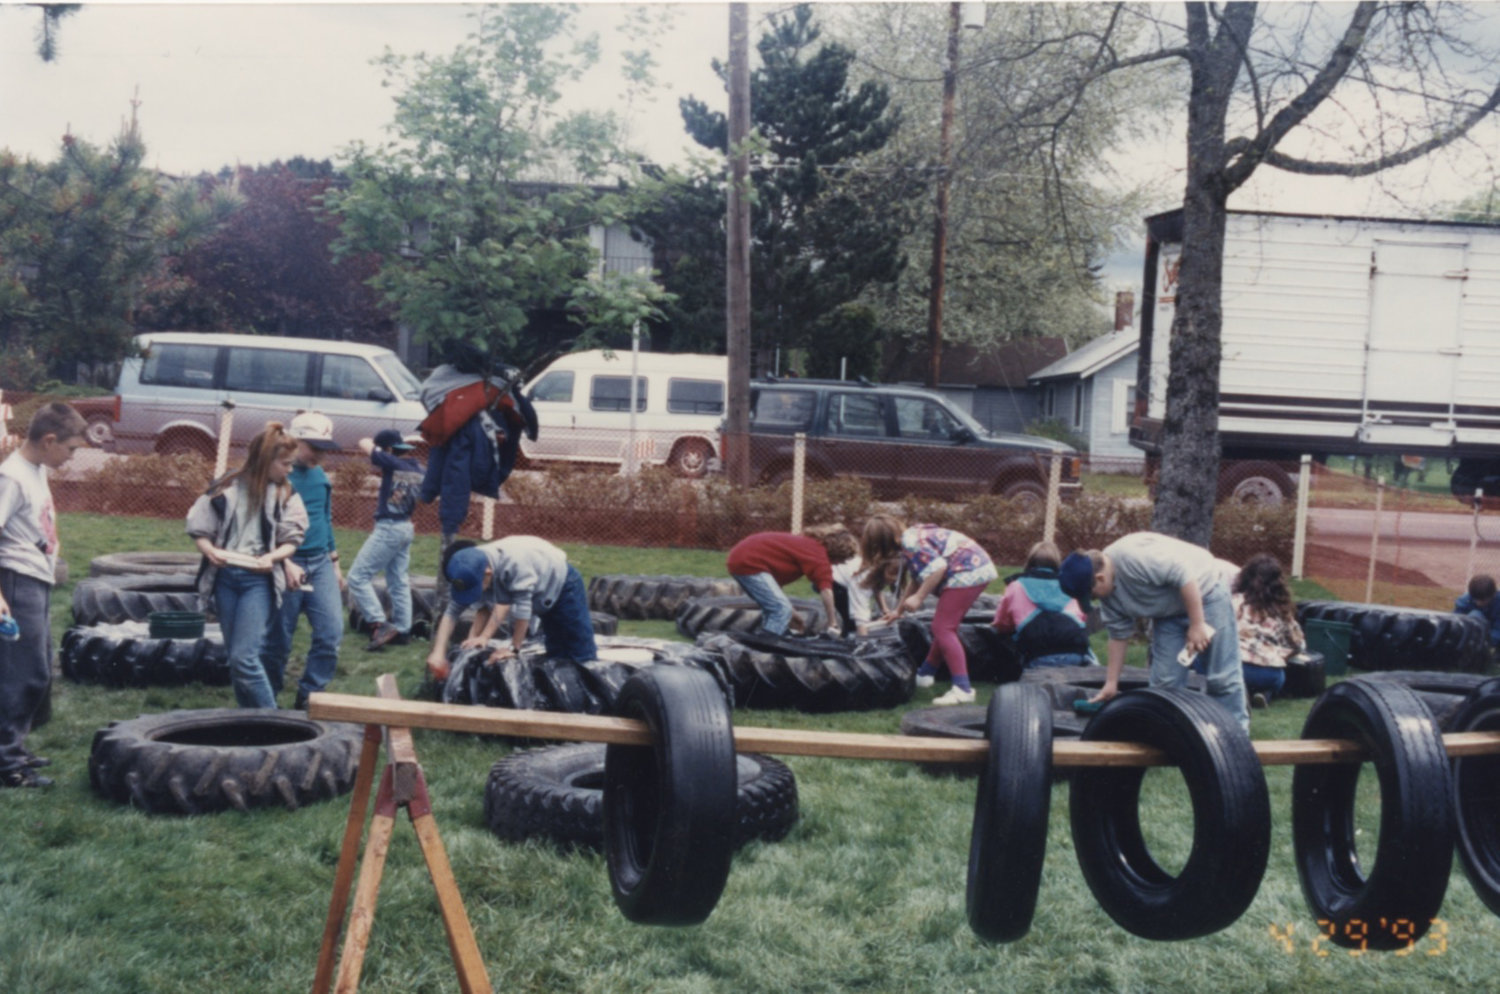 Kids help scrub tires clean during the original construction of Penny Playground.